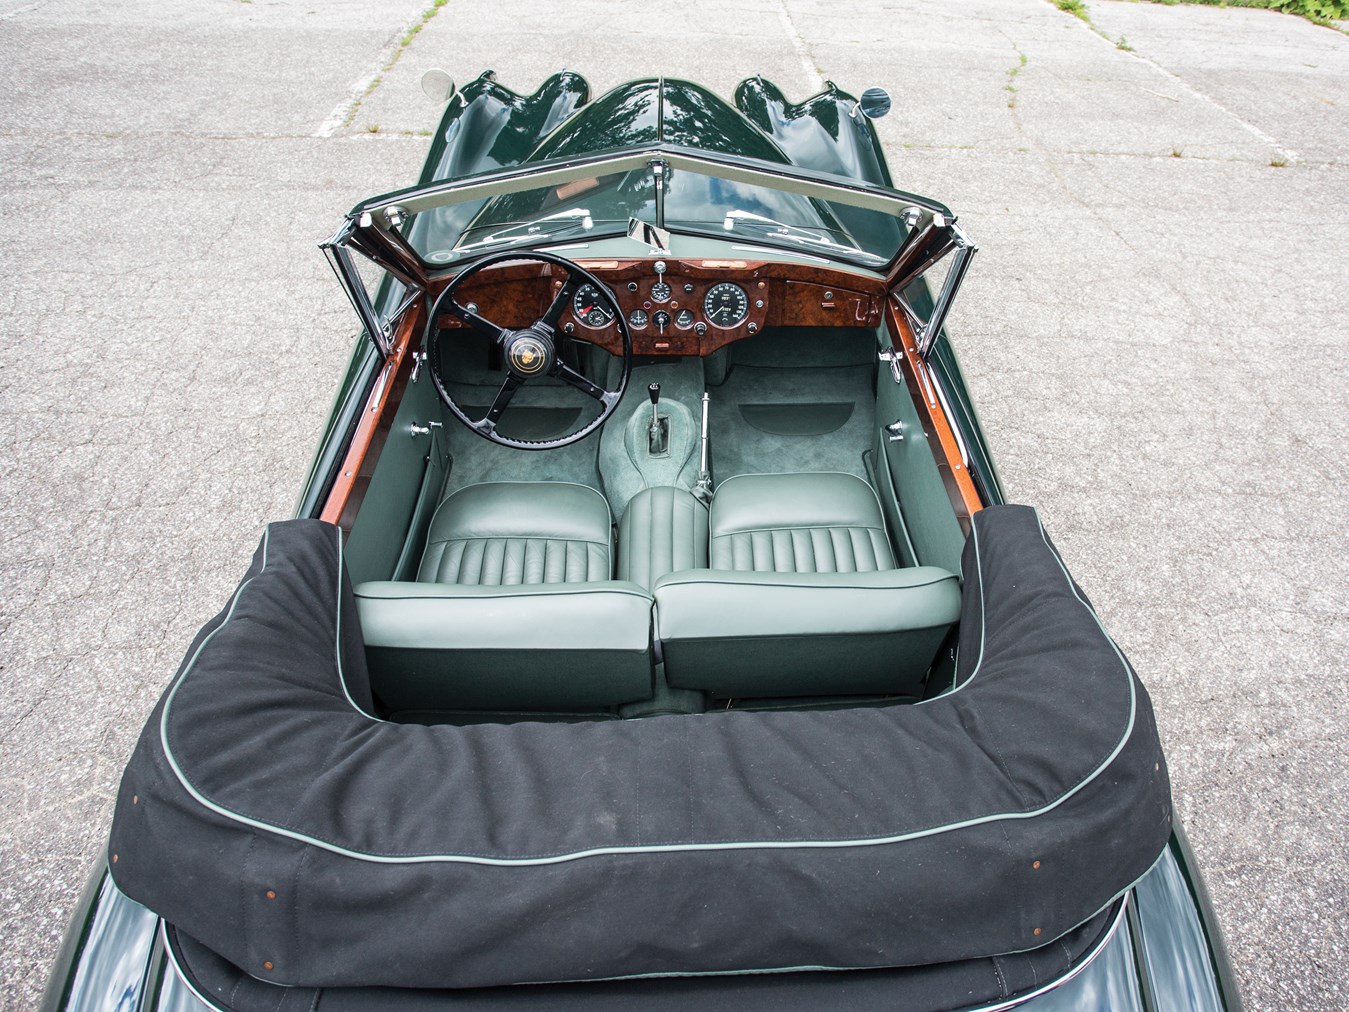 With its extended interior and improved luxury features such as wind up windows the XK140 Drophead Coupé became a rather nicer car than its predecessor.